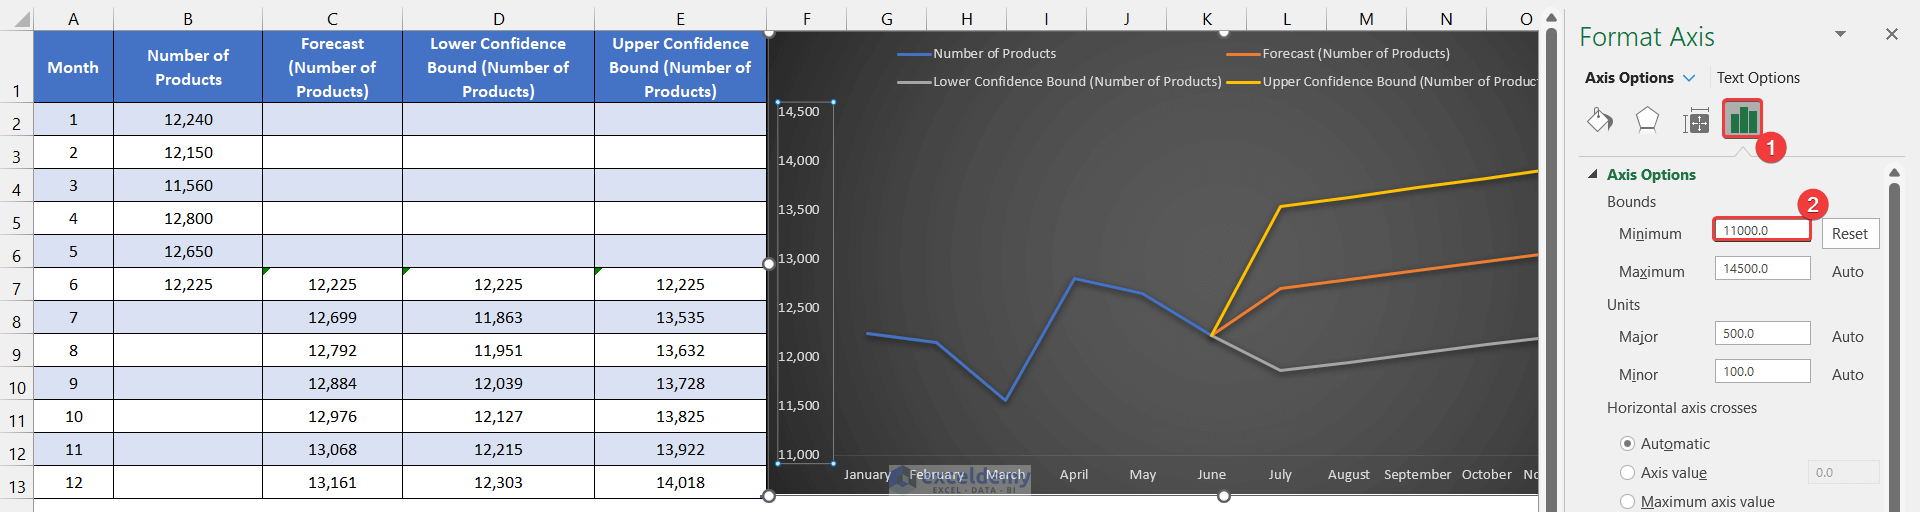 Fill Series Through Forecast Sheet Command to Fill a Series Based on Extrapolation